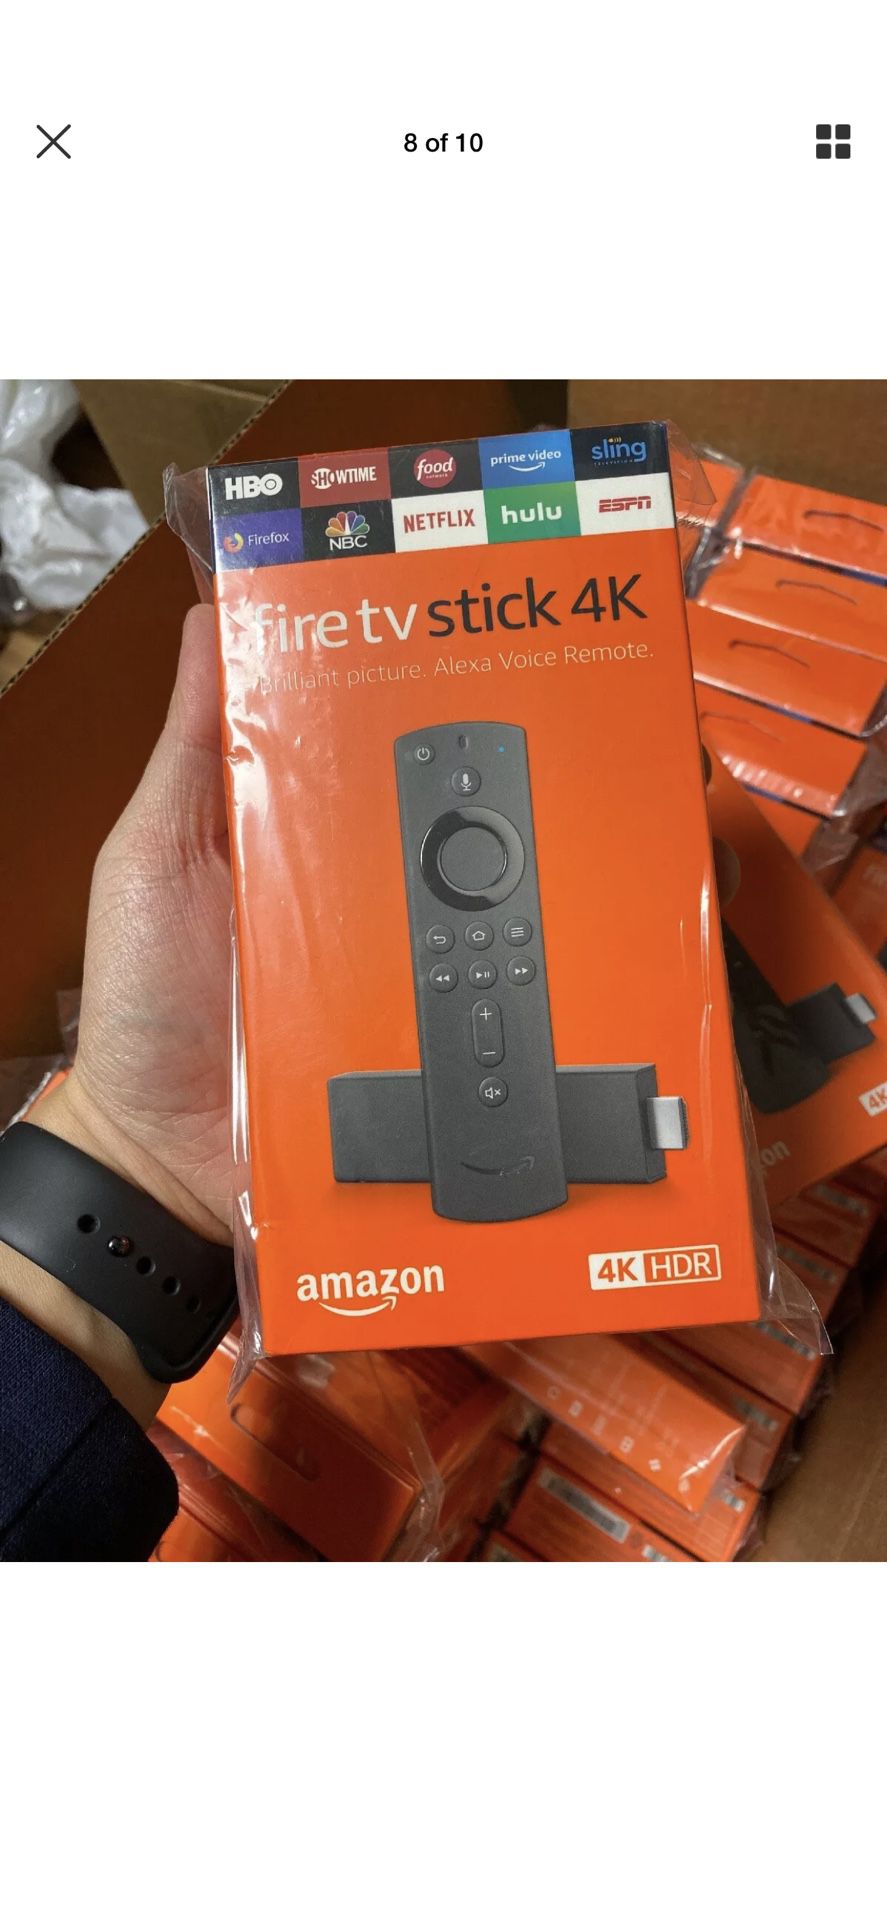 Fire TV Stick. FREE MOVIES AND TELEVISION